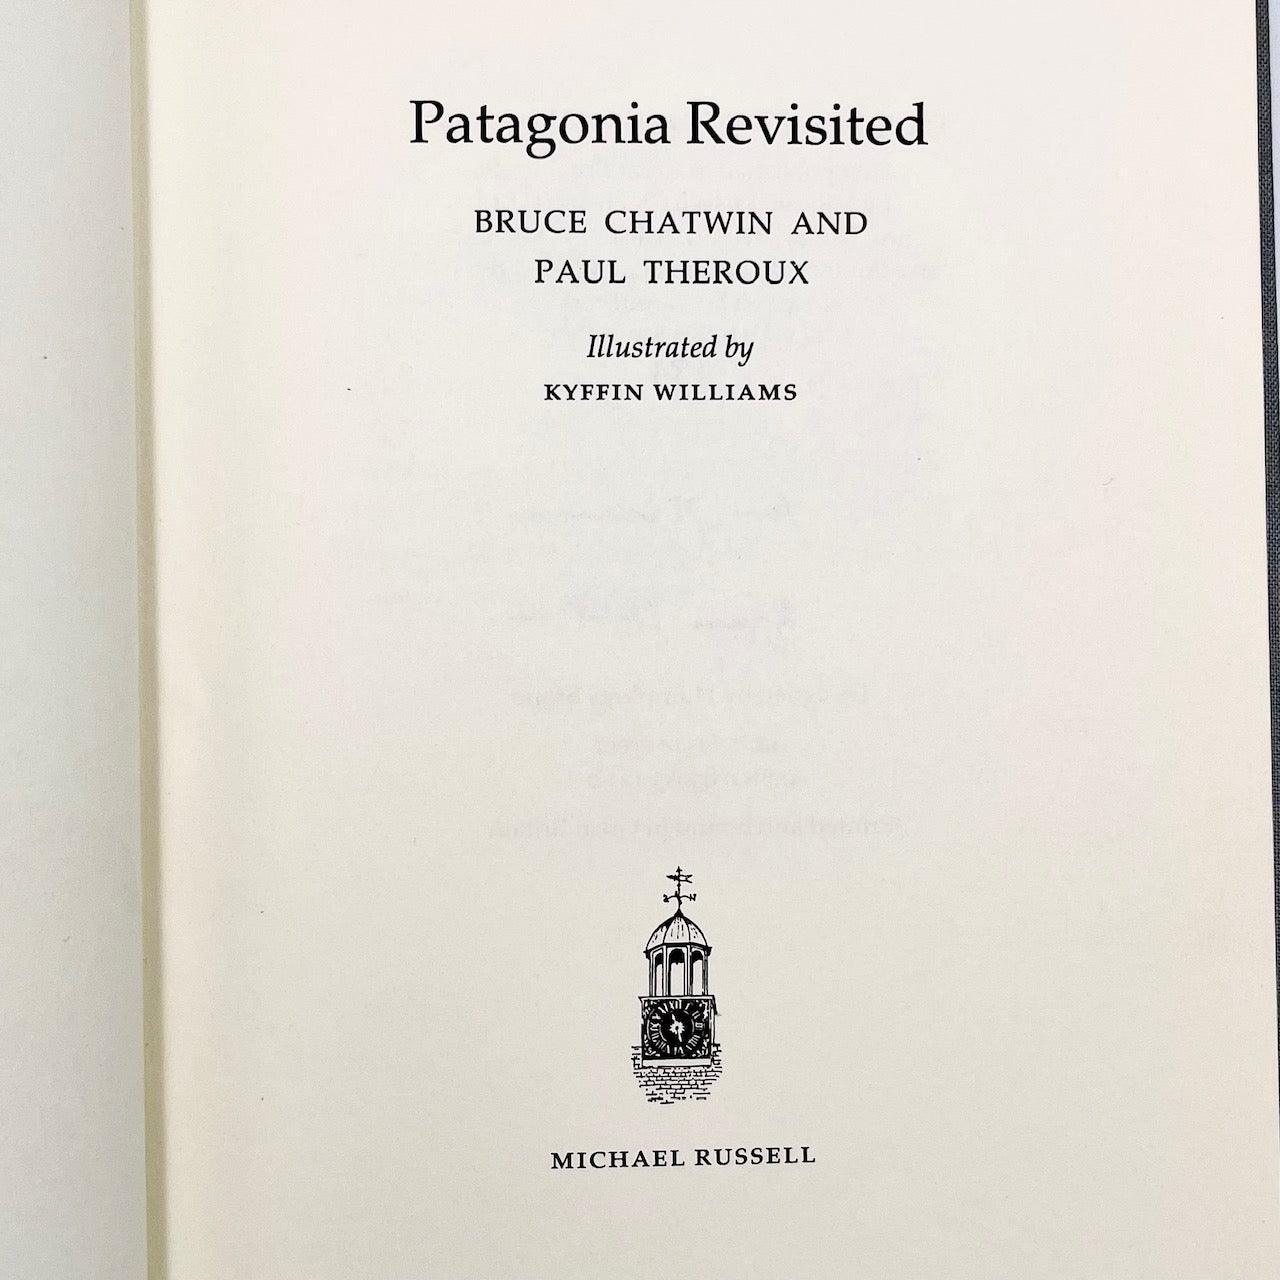 Patagonia Revisited (signed; Illustrated by Kyffin Williams) - Grinning Cat Books - EXPLORATION - HISTORY, SIGNED, SOUTH AMERICA, TRAVEL